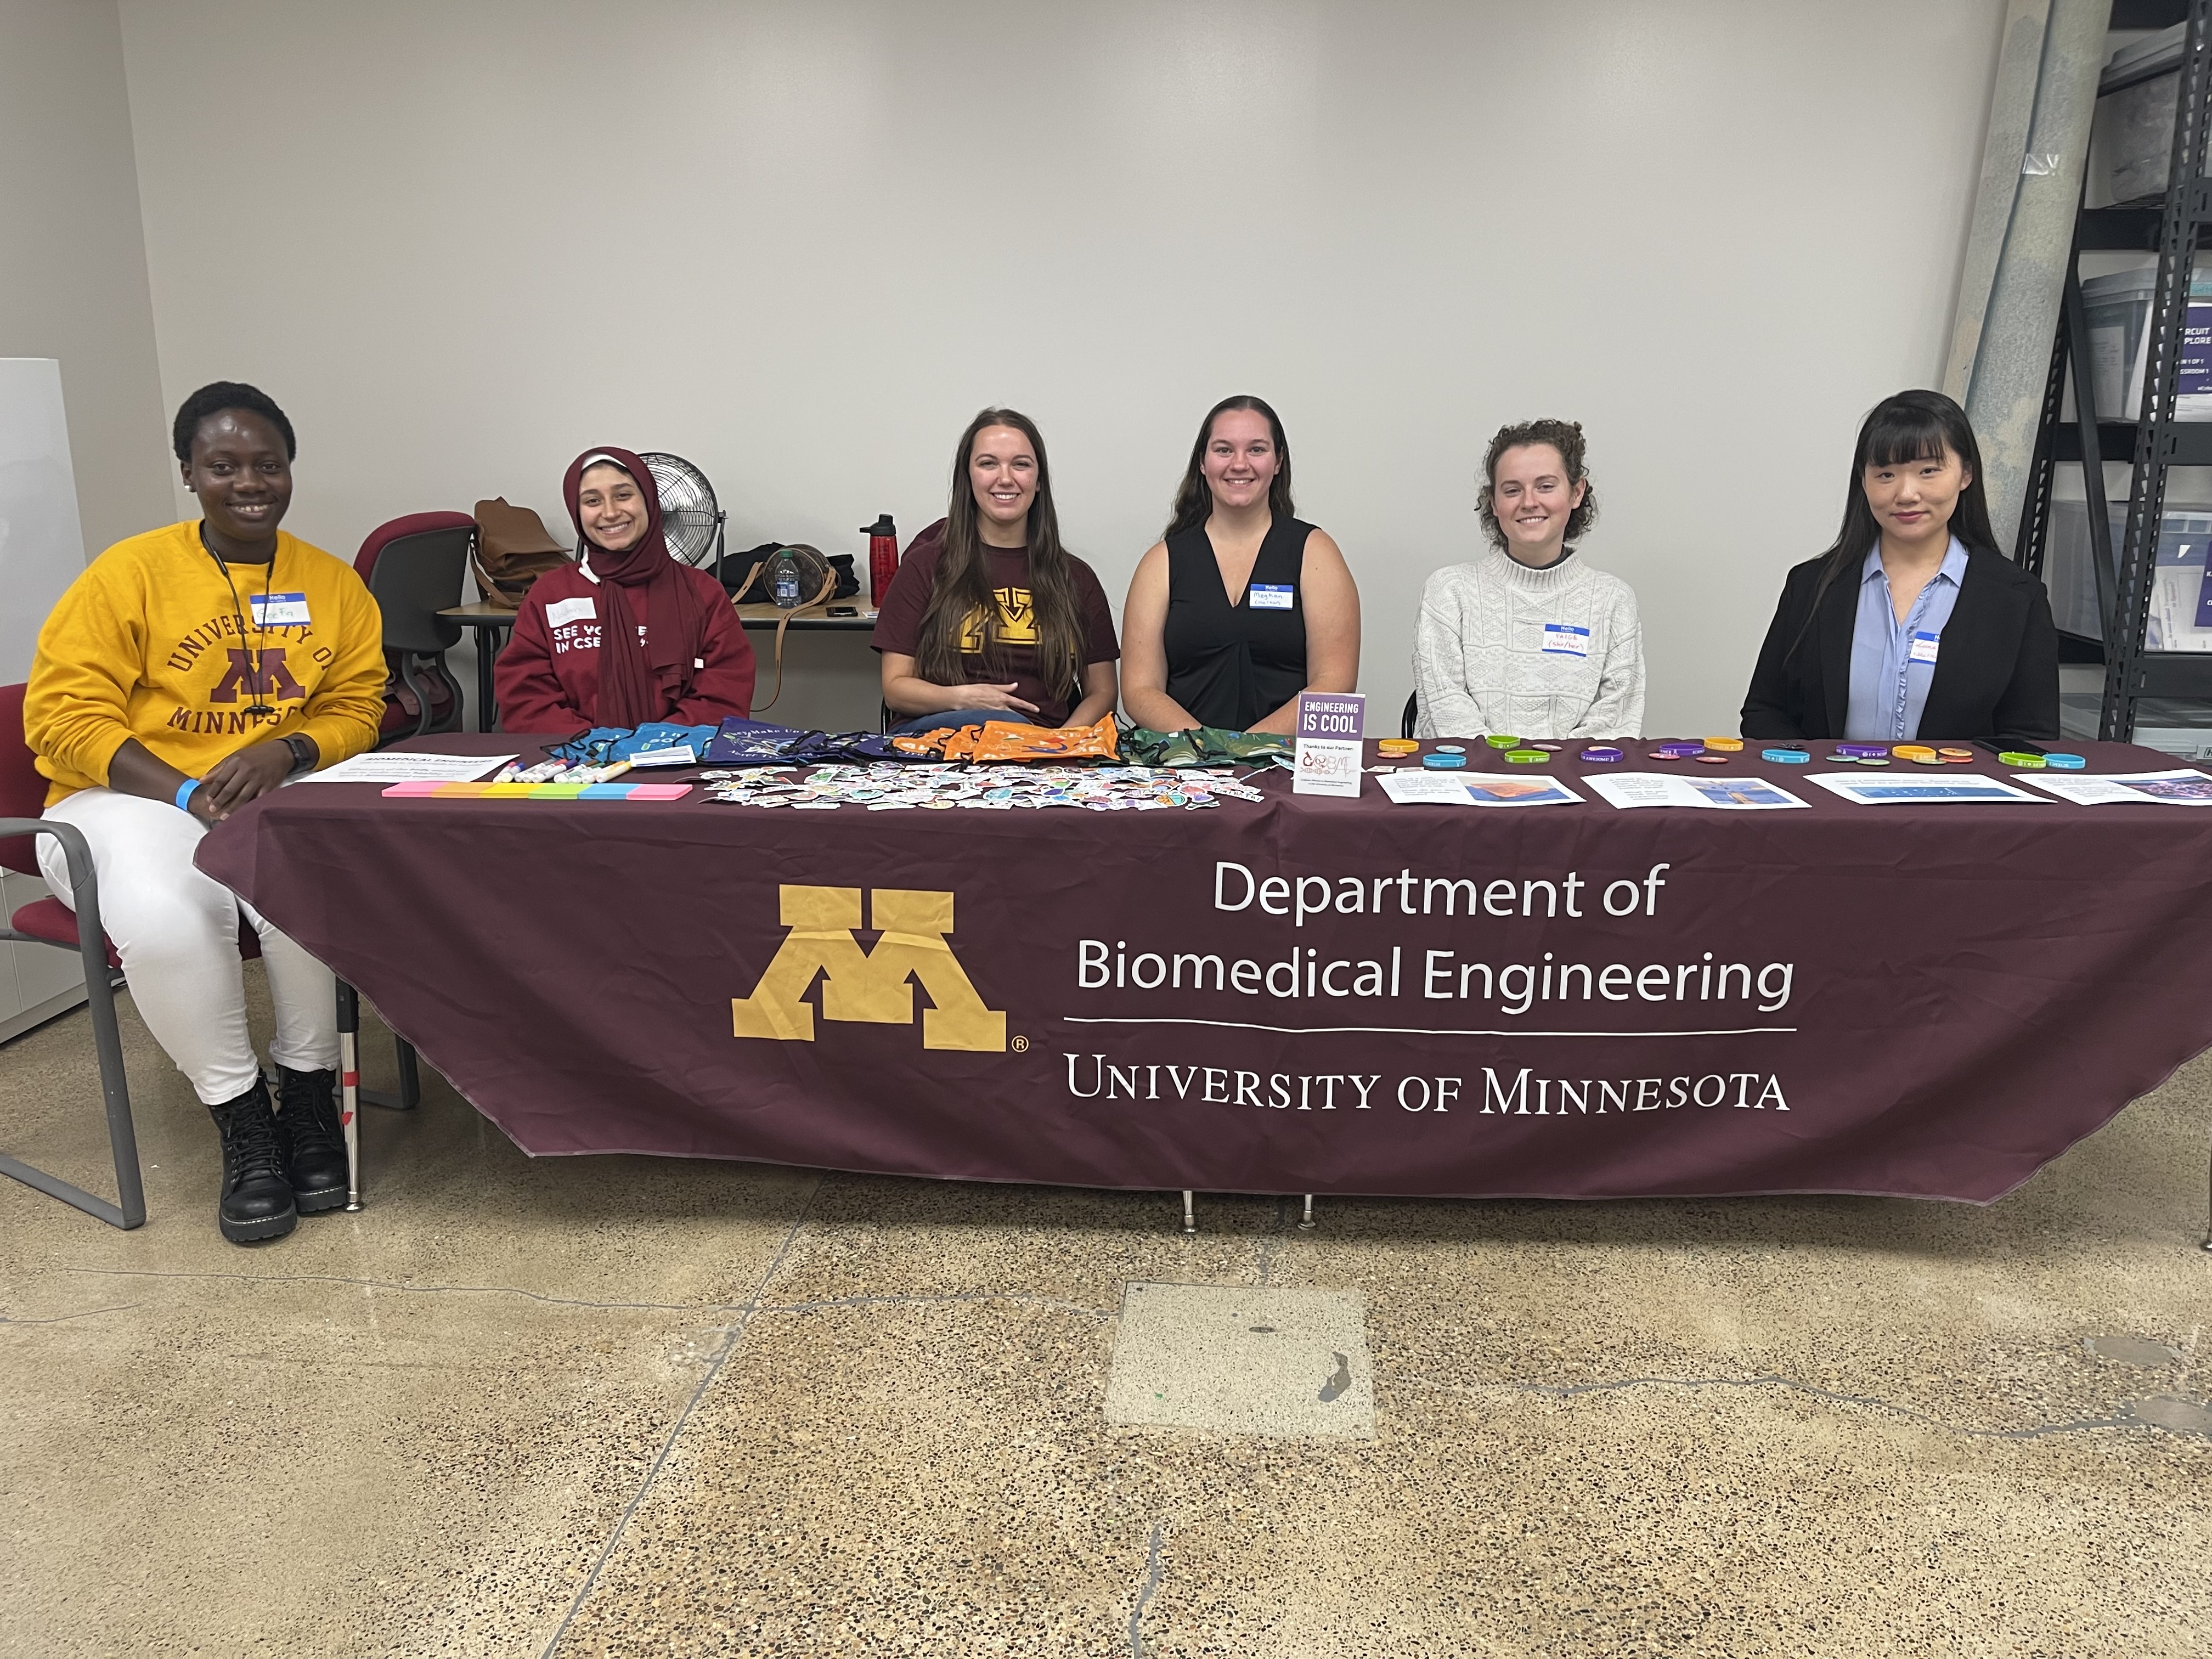 A group of women sit behind a table with a tablecloth that reads "Department of Biomedical Engineering, University of Minnesota"